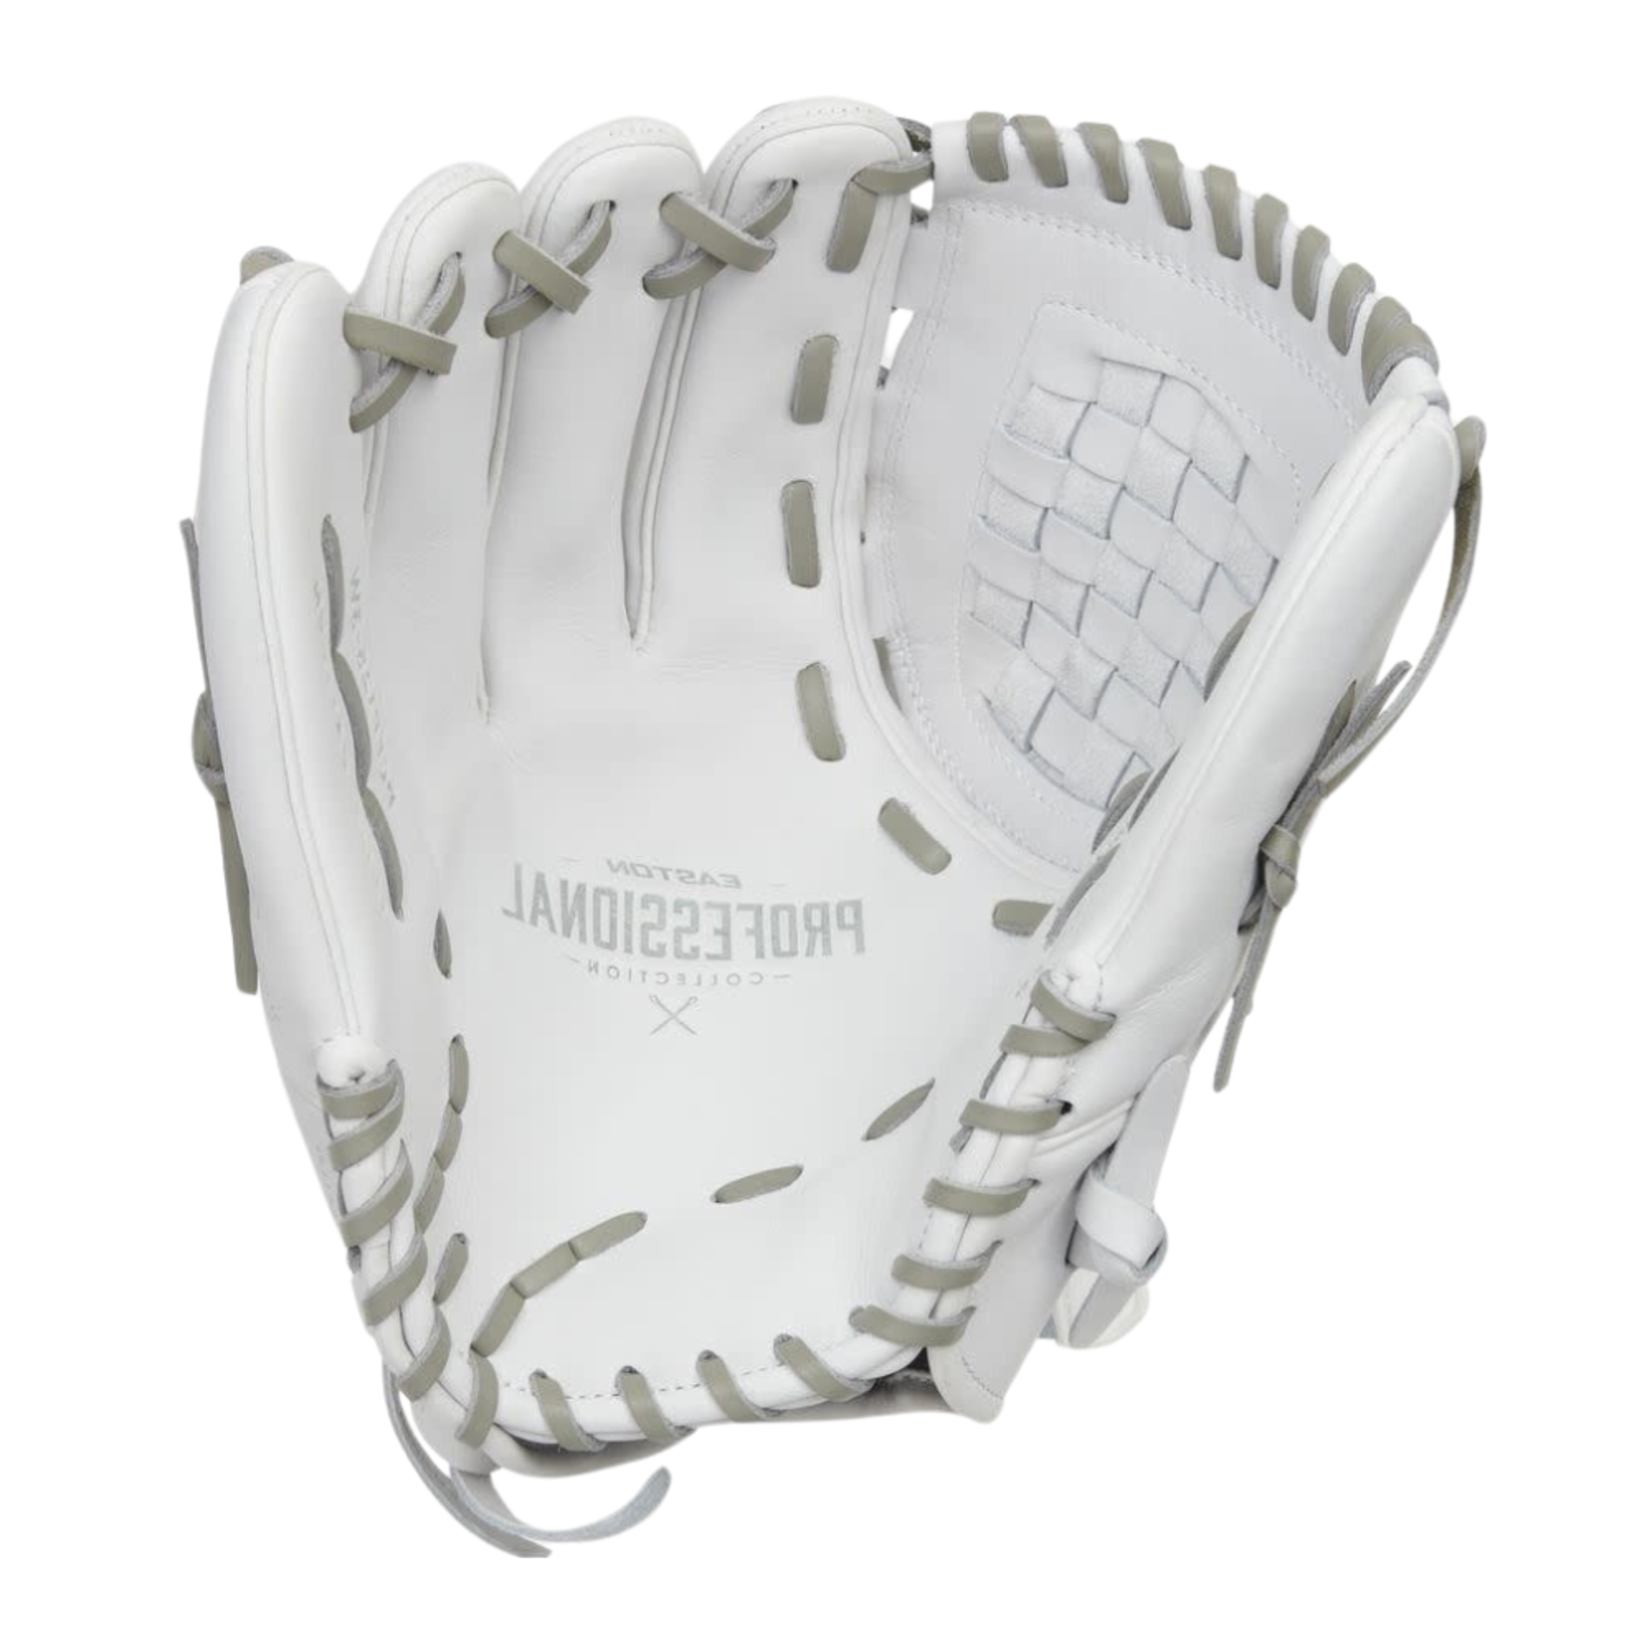 Easton Easton Baseball Glove, Professional Collection, Fastpitch, EPCFP125-3W, 12.5”, Full Right